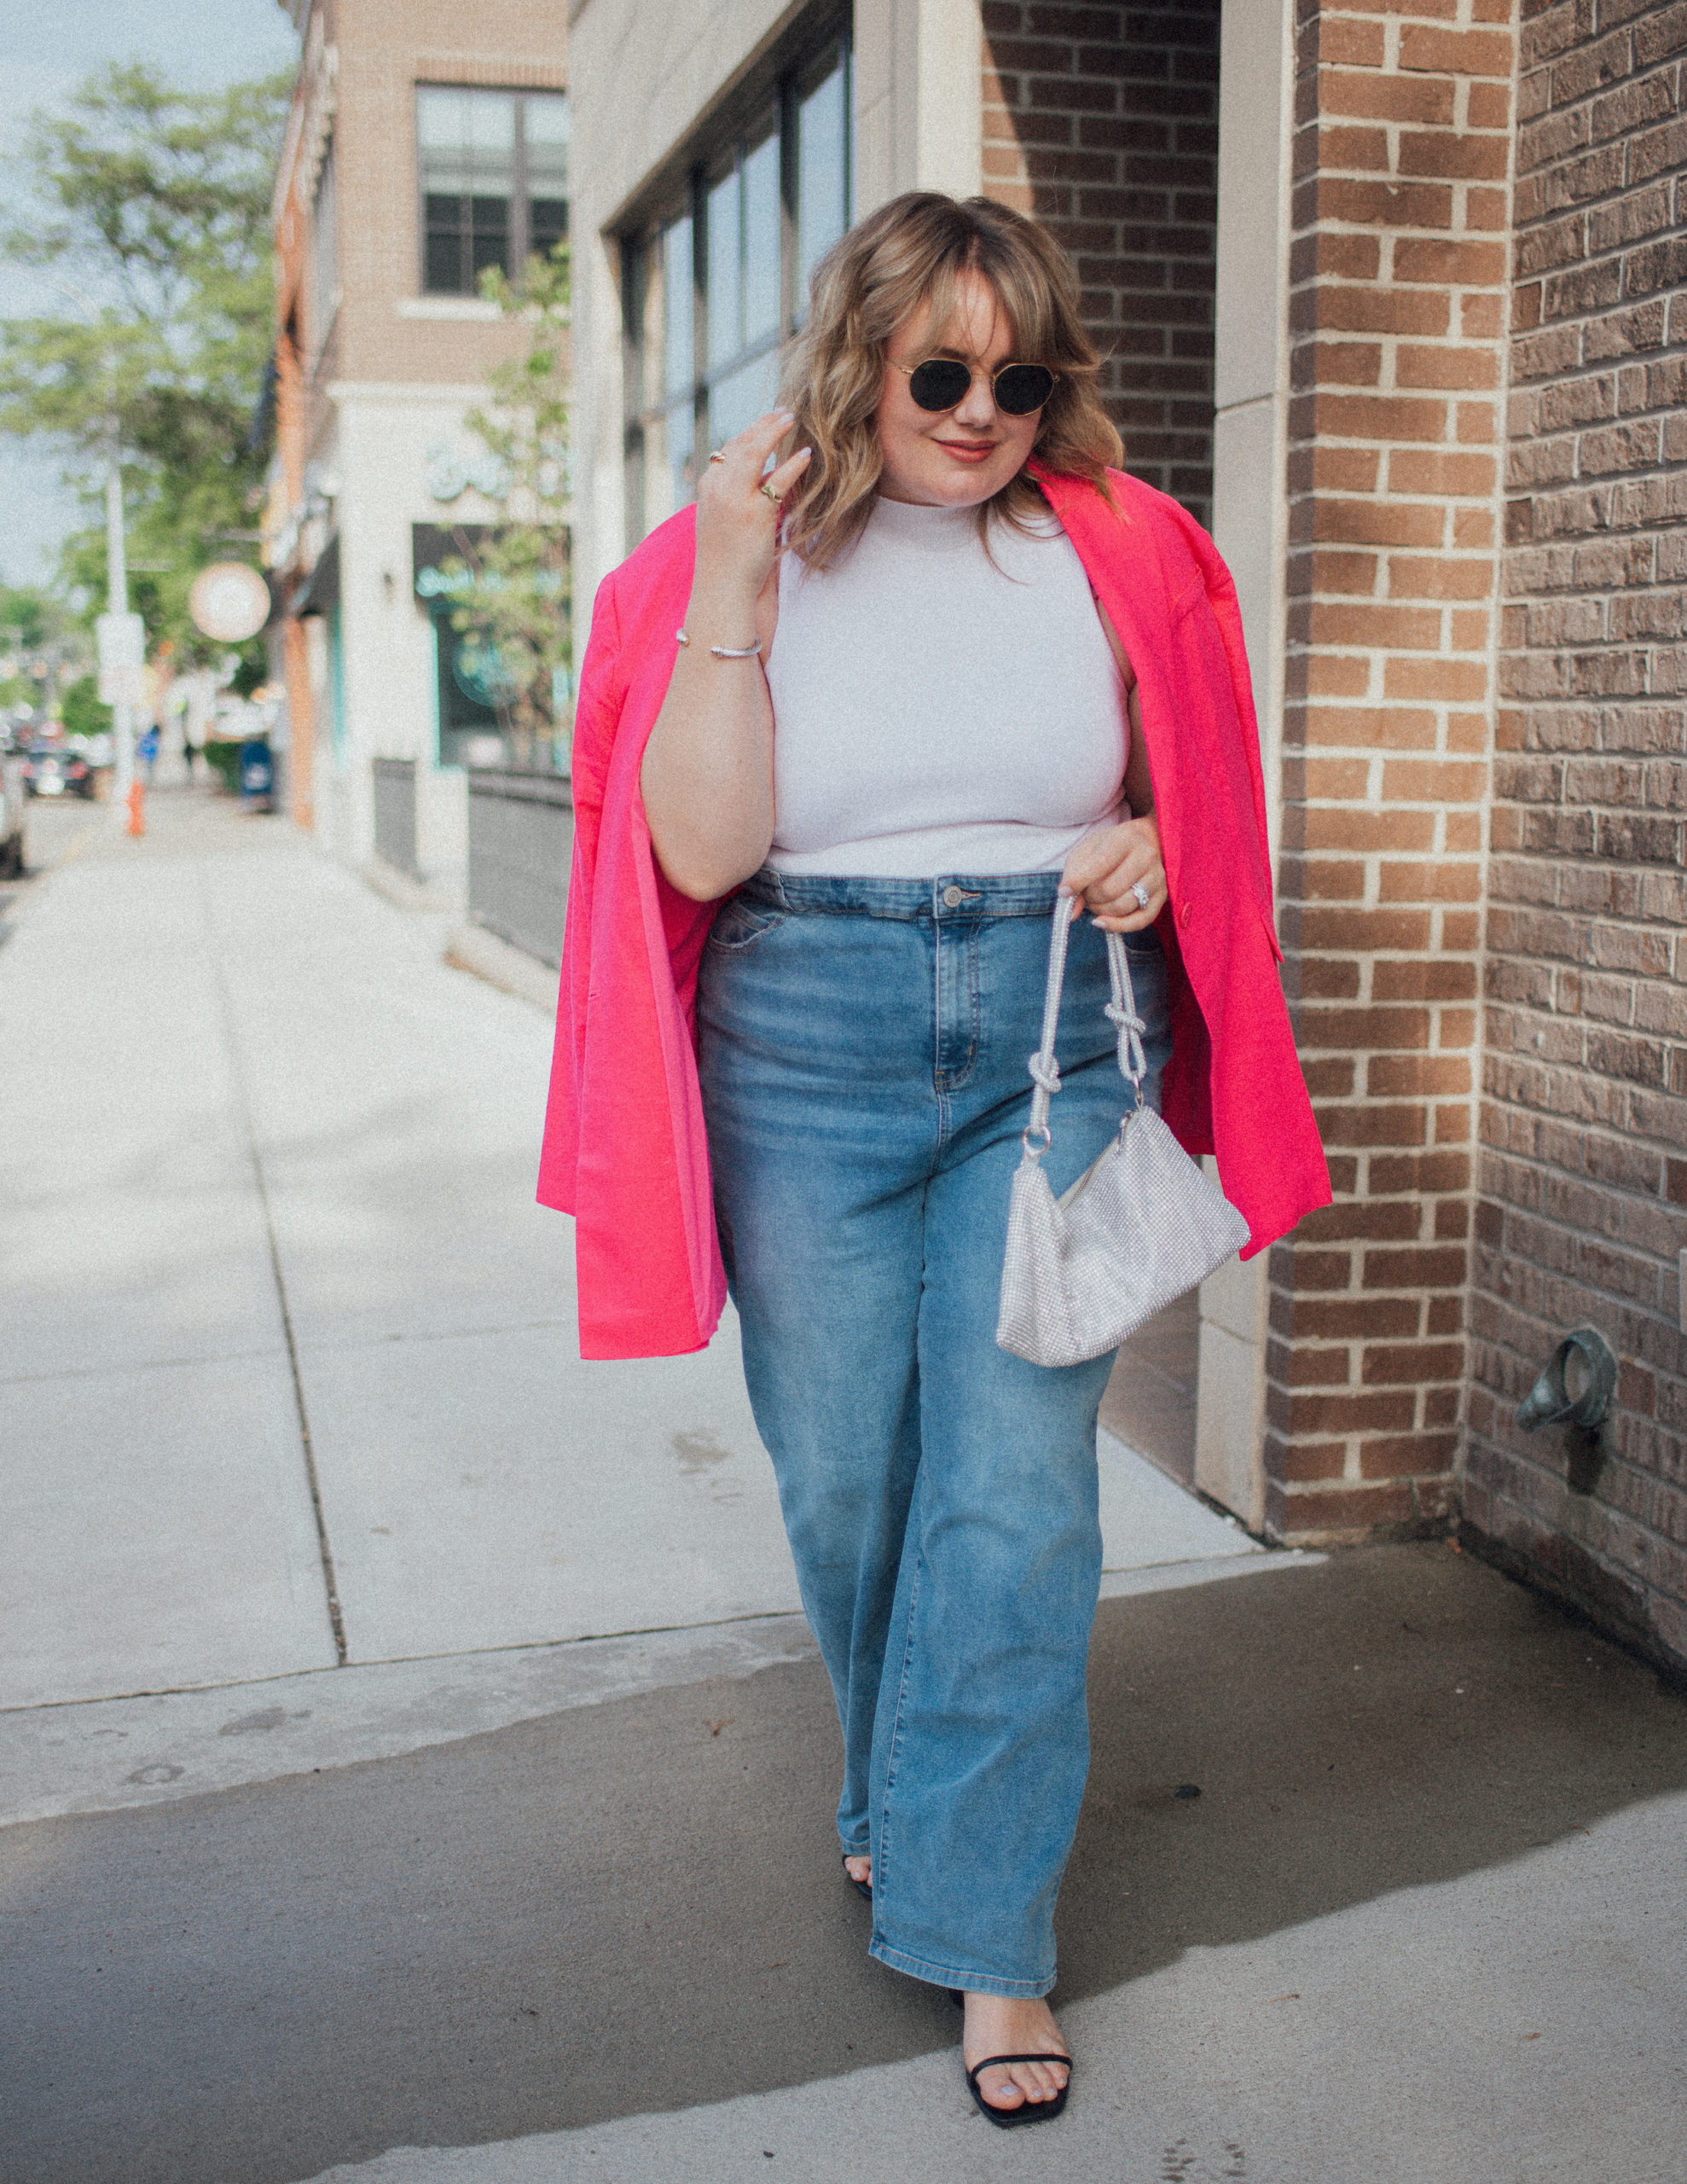 Sharing a plus size blazer outfit idea for summer! Blazers are the trend right now and having a bright option in a summer fabric is key! 